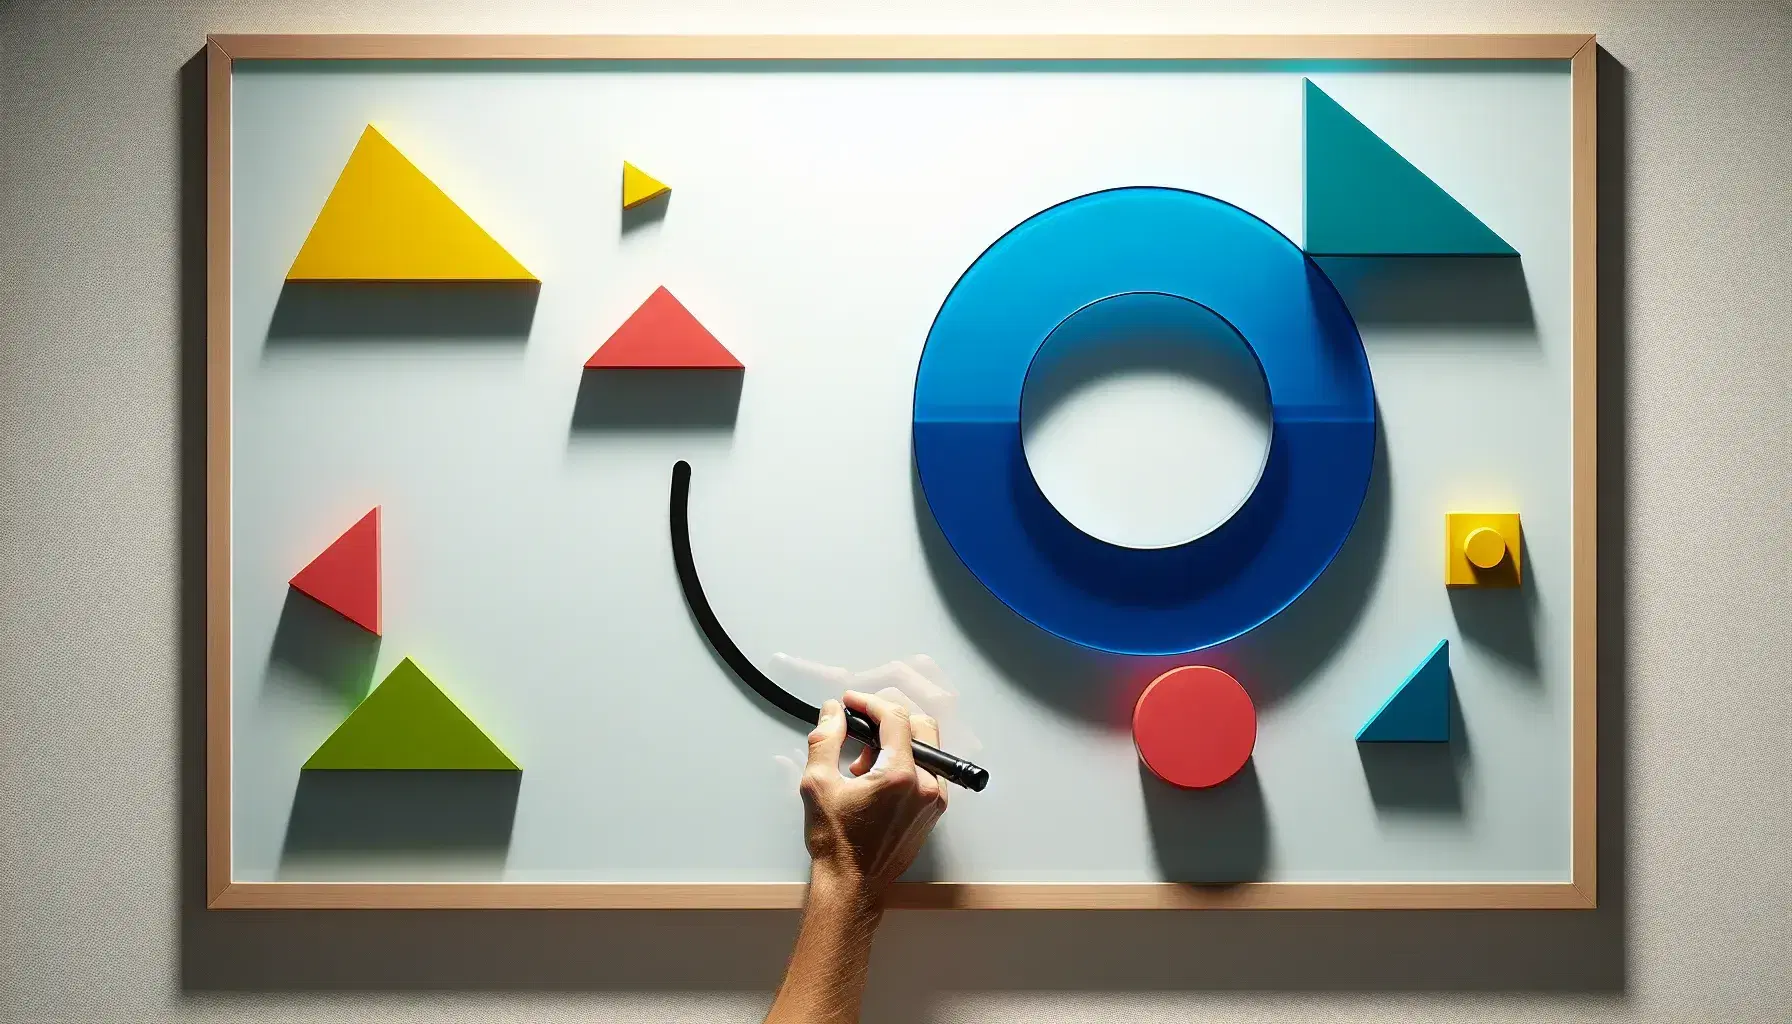 Colorful geometric shapes on a whiteboard with a hand holding a marker, suggesting an educational setting with a focus on learning shapes and colors.